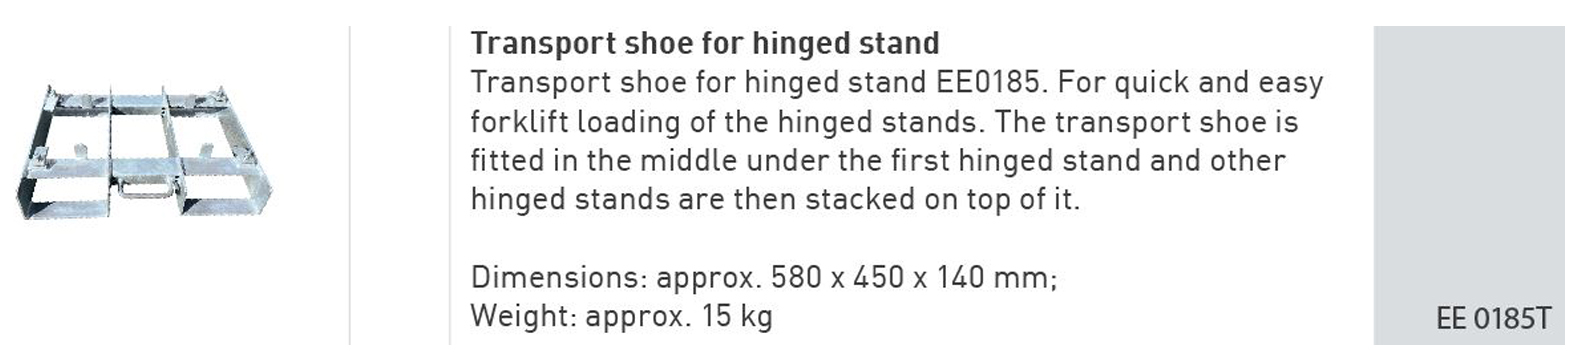 Transport shoe for hinged stand, art.no. EE0185T